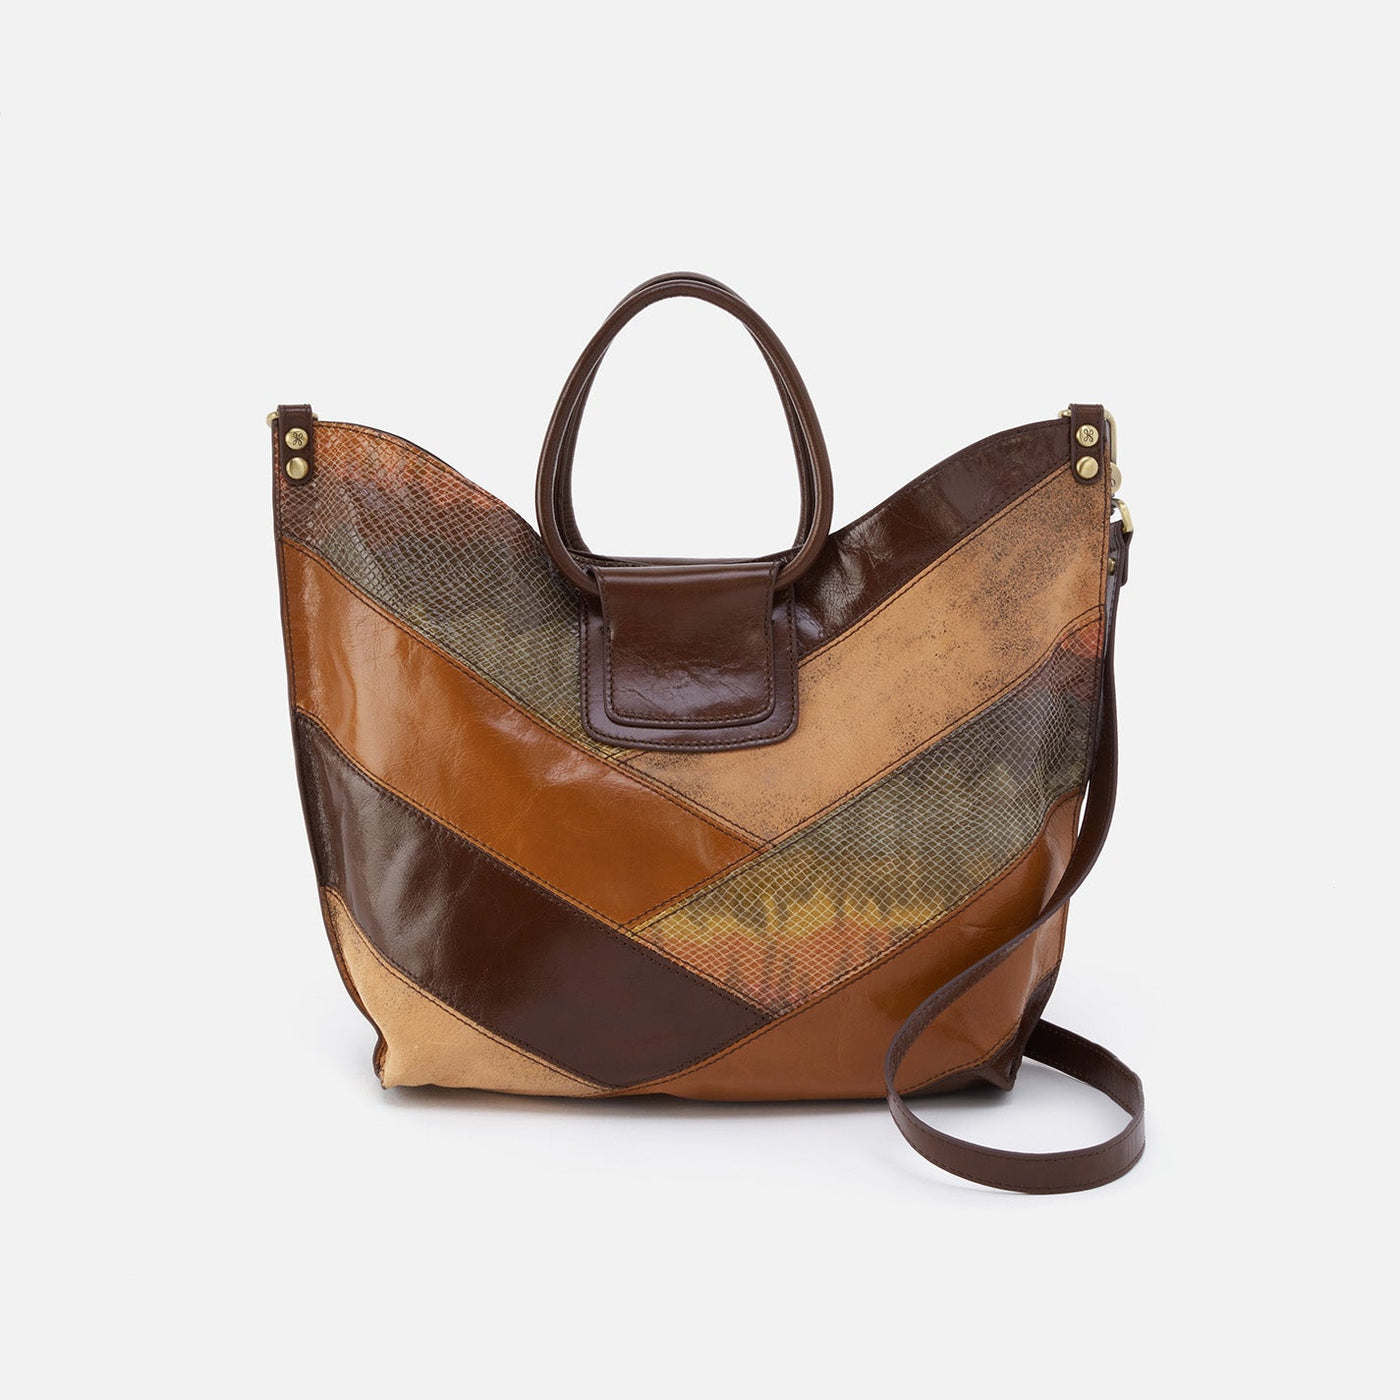 Sheila Tote in Patchwork Leather - Mocha Multi